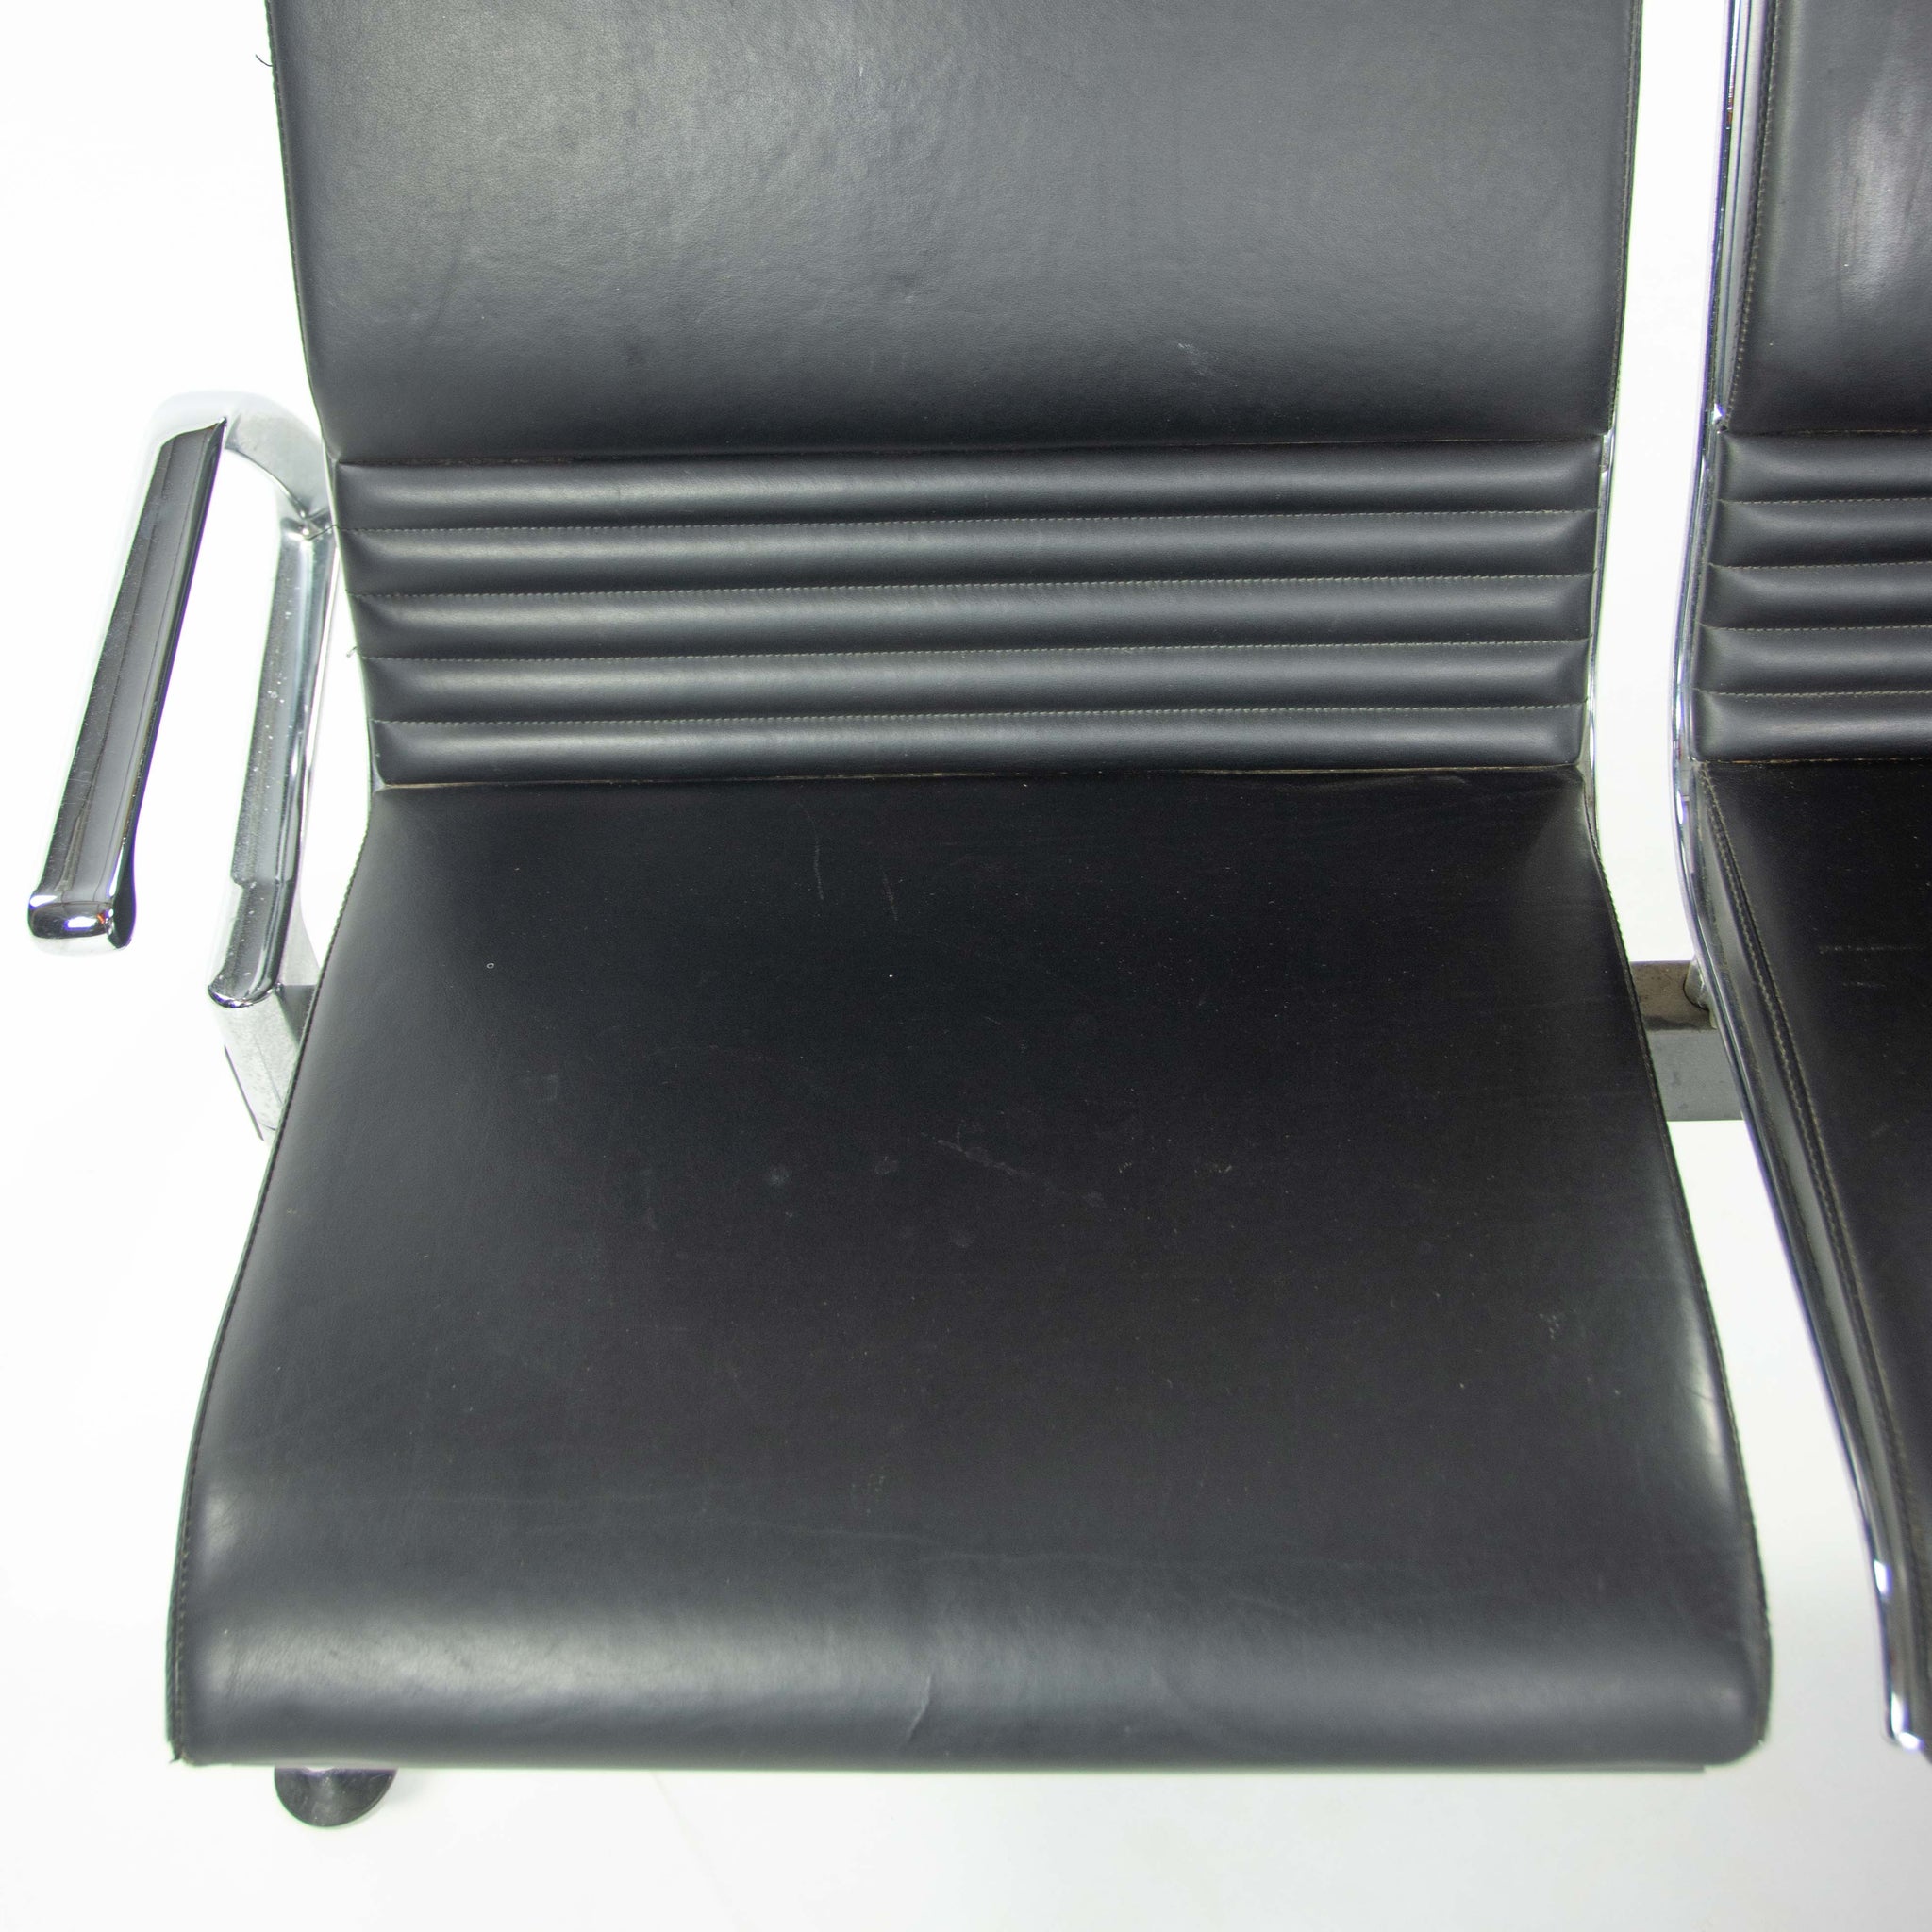 SOLD Jorgen Kastholm Kusch+Co 7130 3-Seater Airport Bench Seating Black Leather